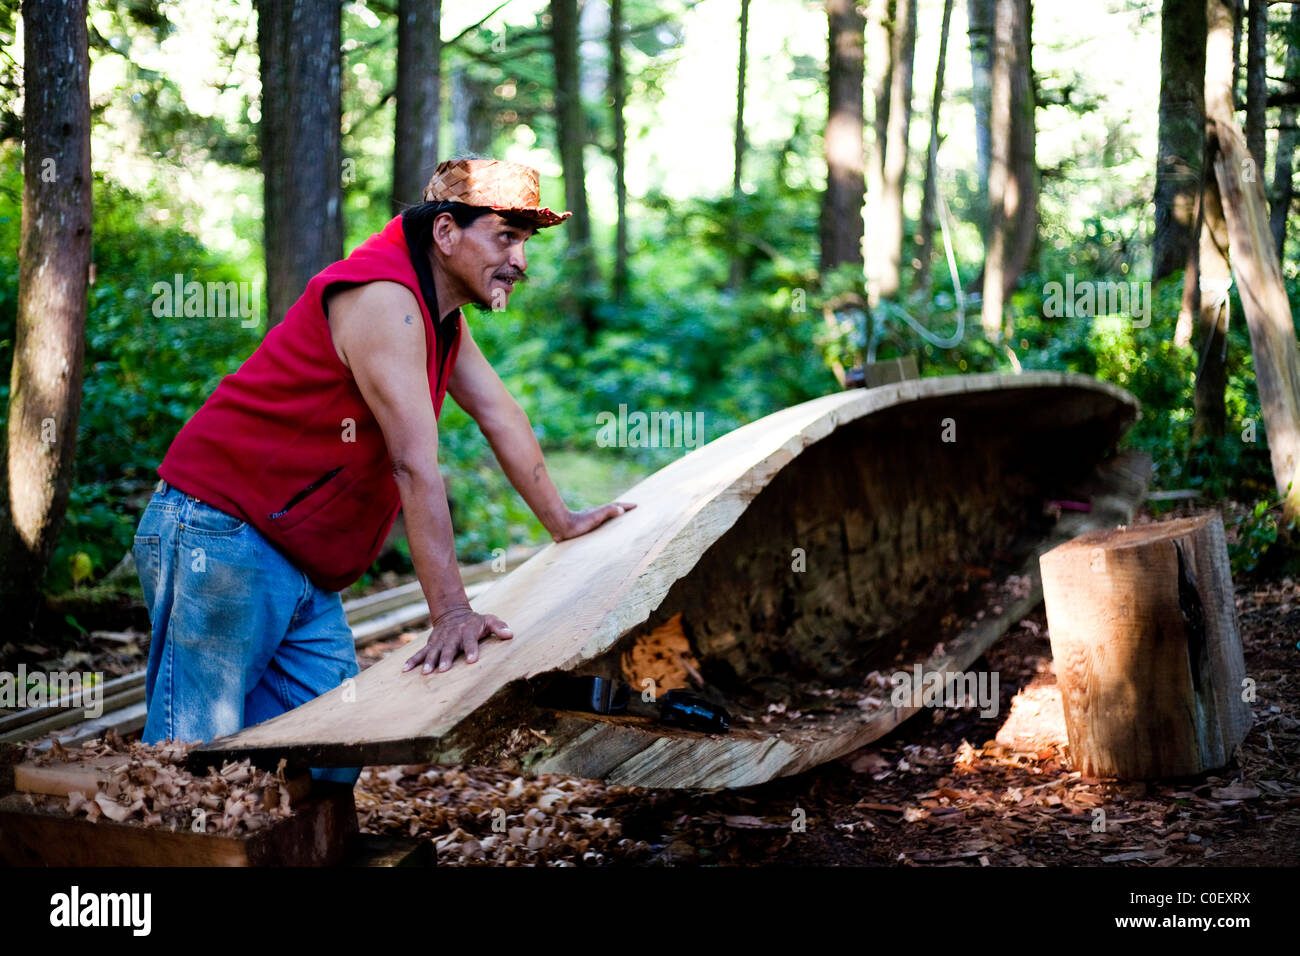 A man native to the West Coast of Vancouver Island carves a canoe as his tribes have for centuries. Stock Photo